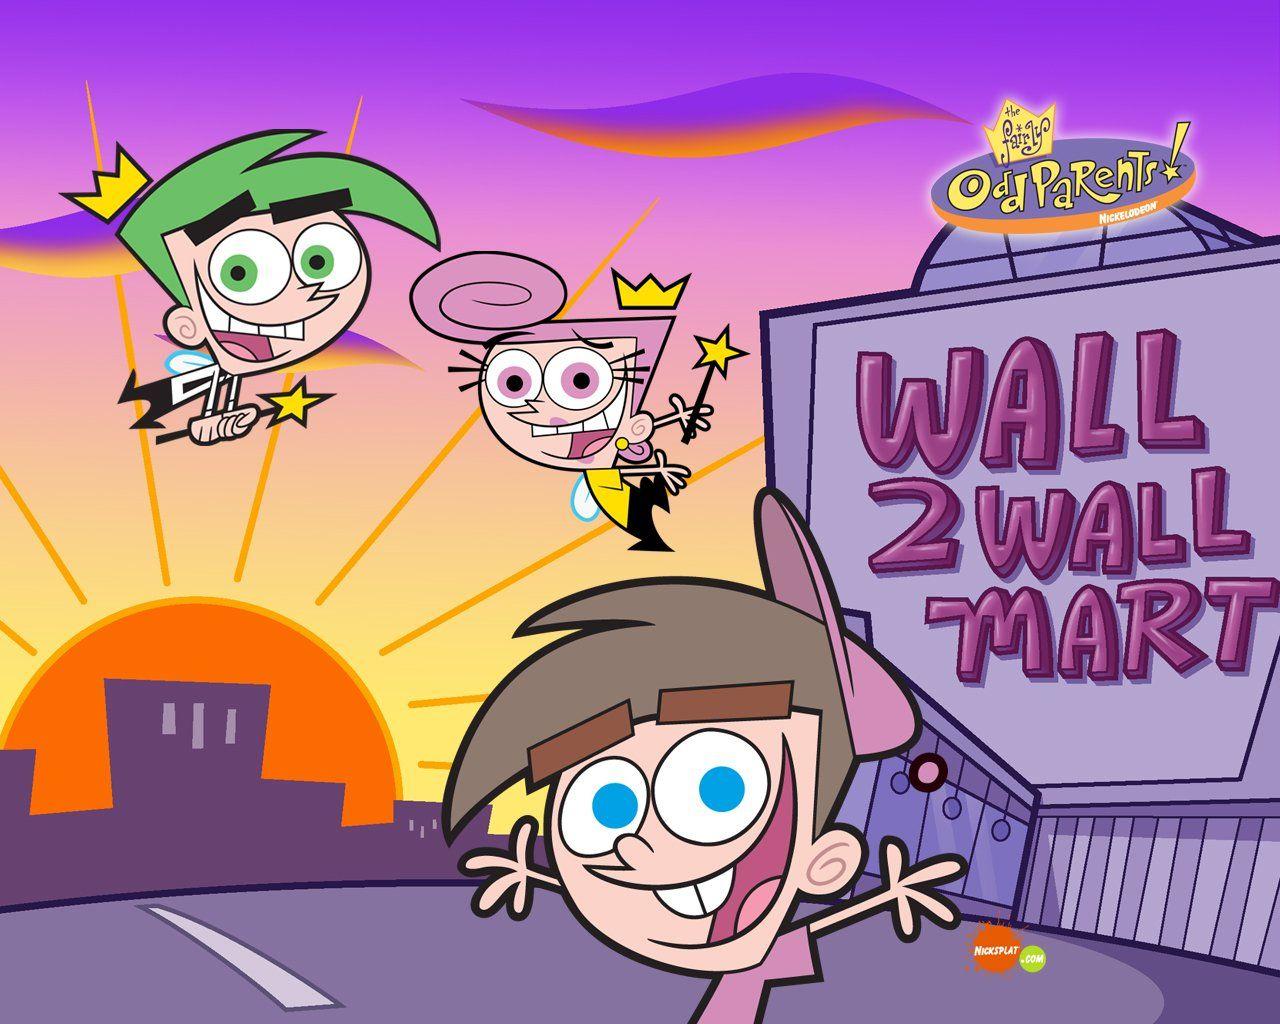 Anime. The fairly oddparents, Cartoon, Wallpaper